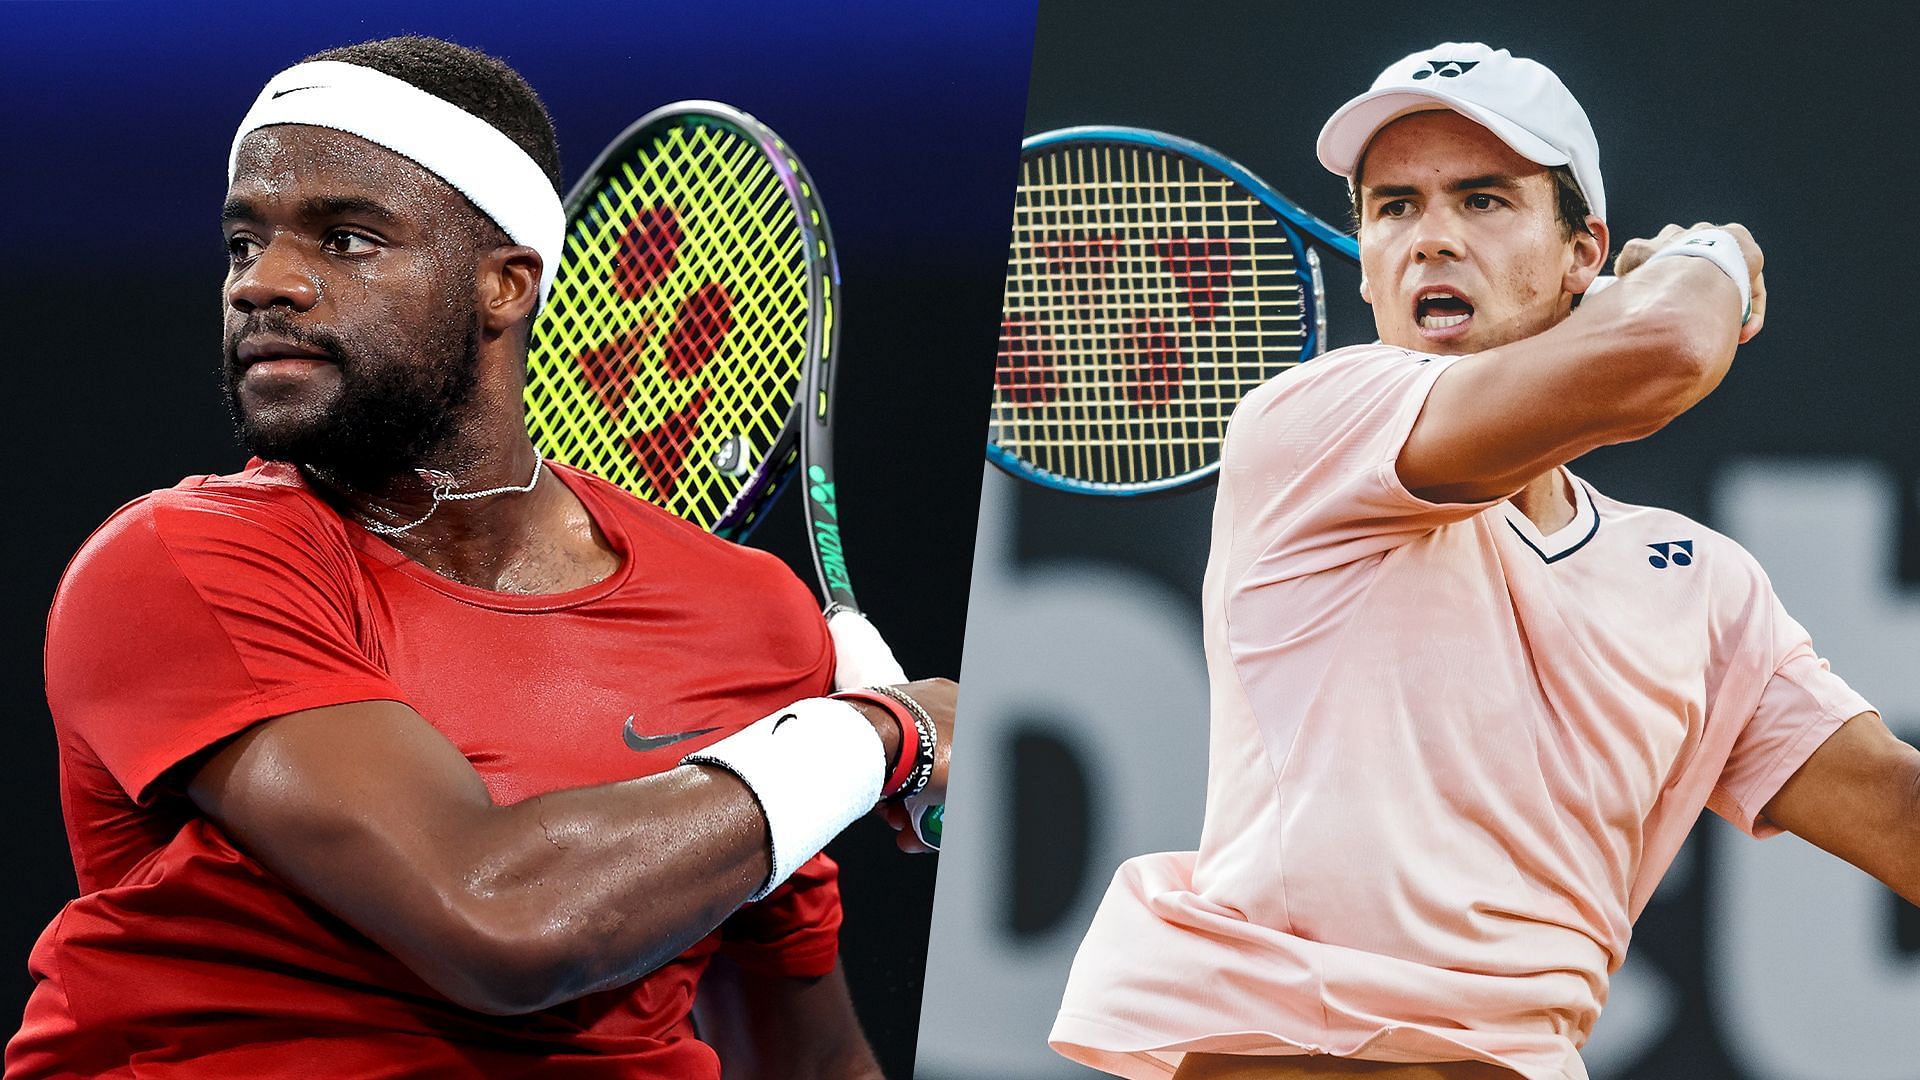 Frances Tiafoe will face Daniel Altmaier in the first round of the Australian Open